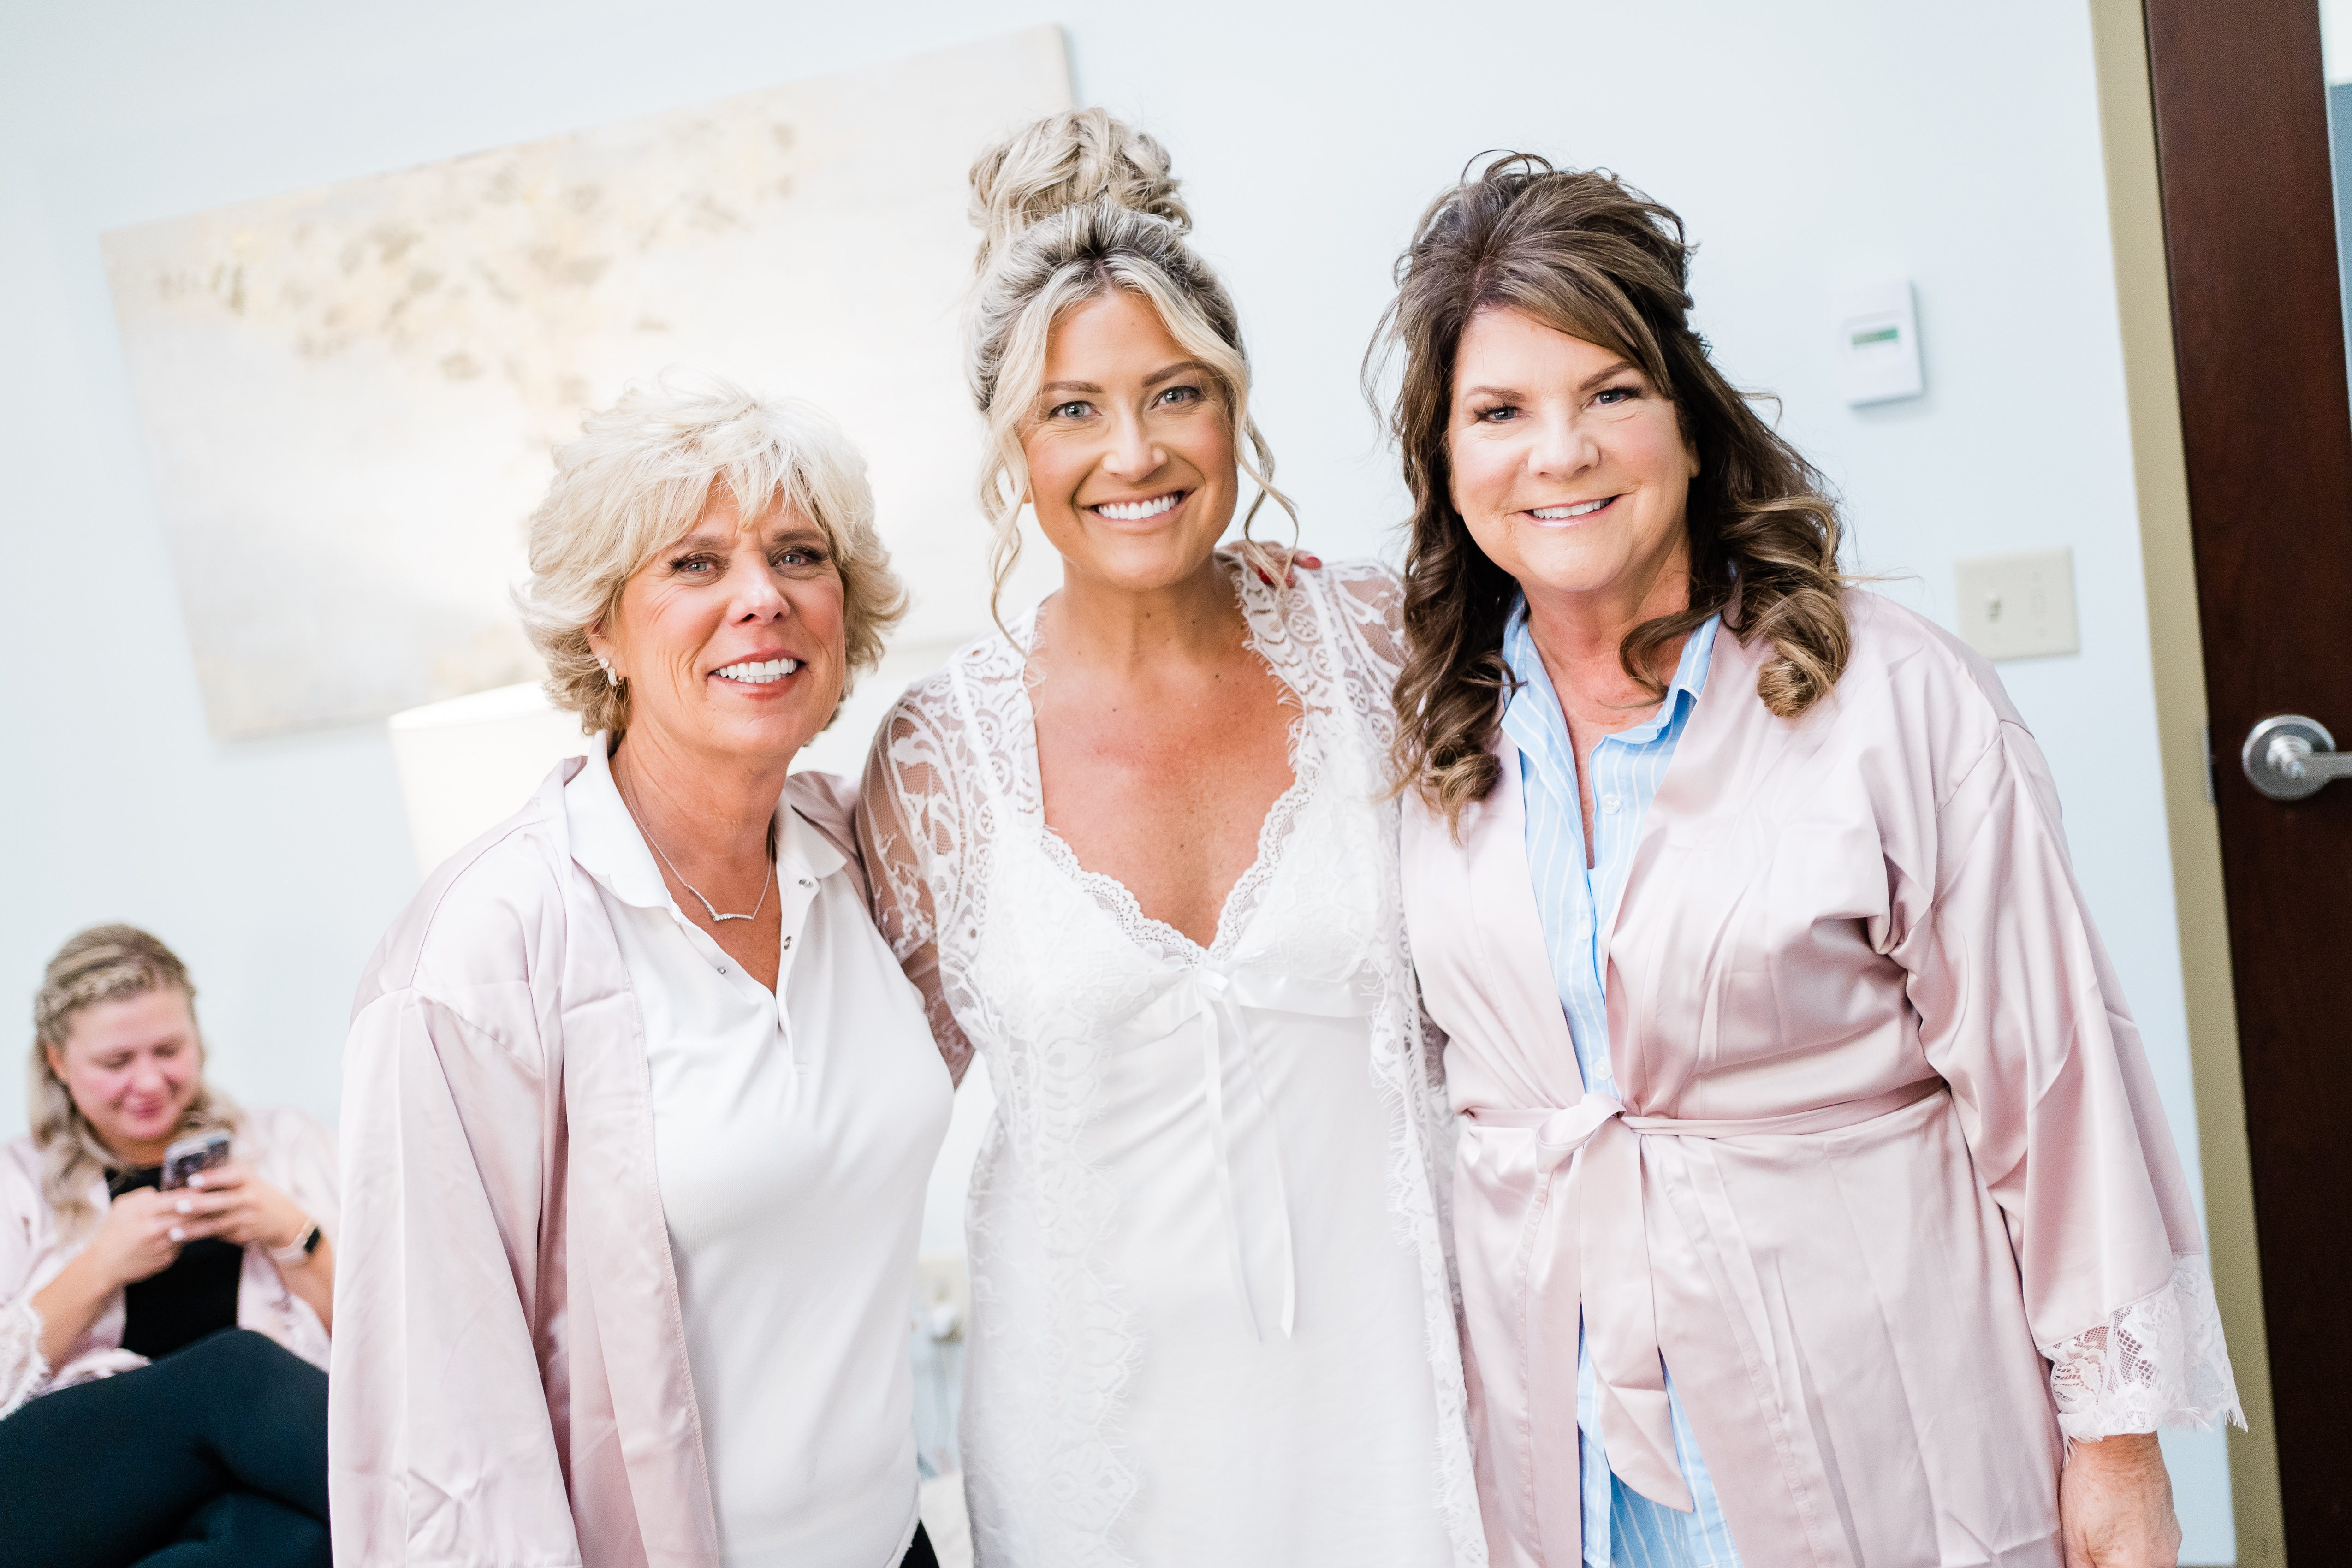 Fort Wayne wedding photographer captures bride standing with her mom and groom's mom before modern ohio golf course wedding